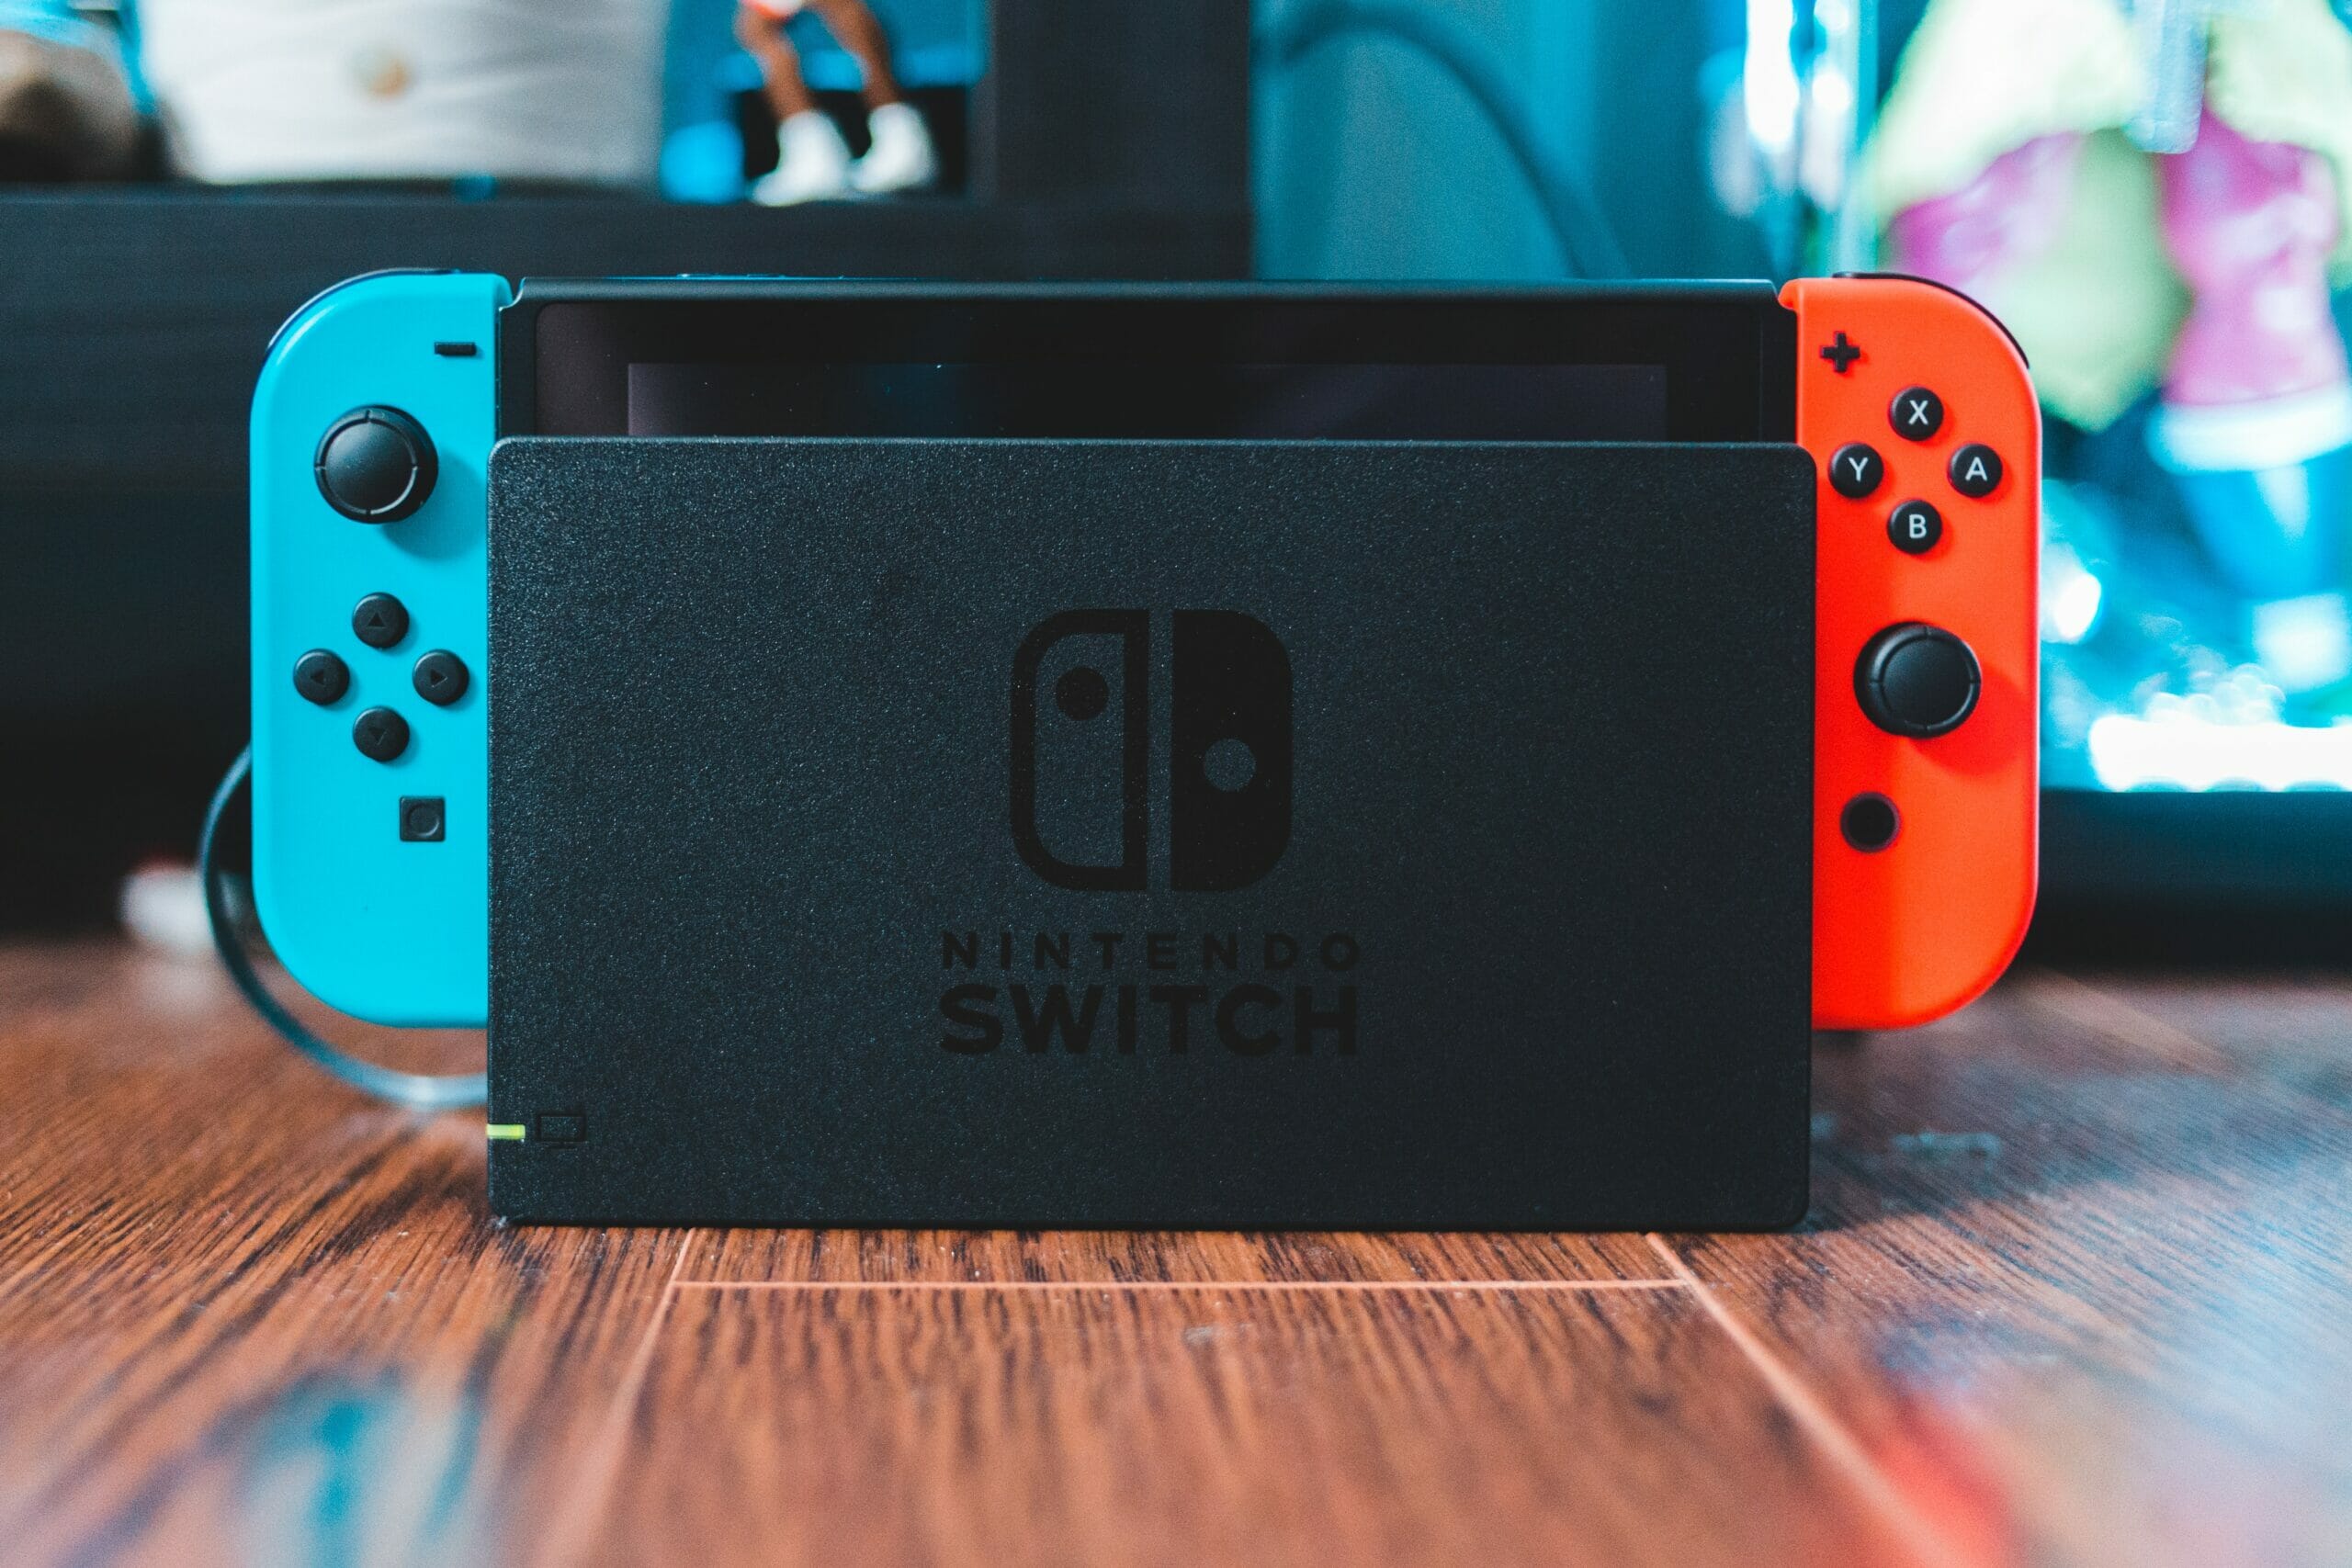 A picture of the original Nintendo Switch in its black dock.